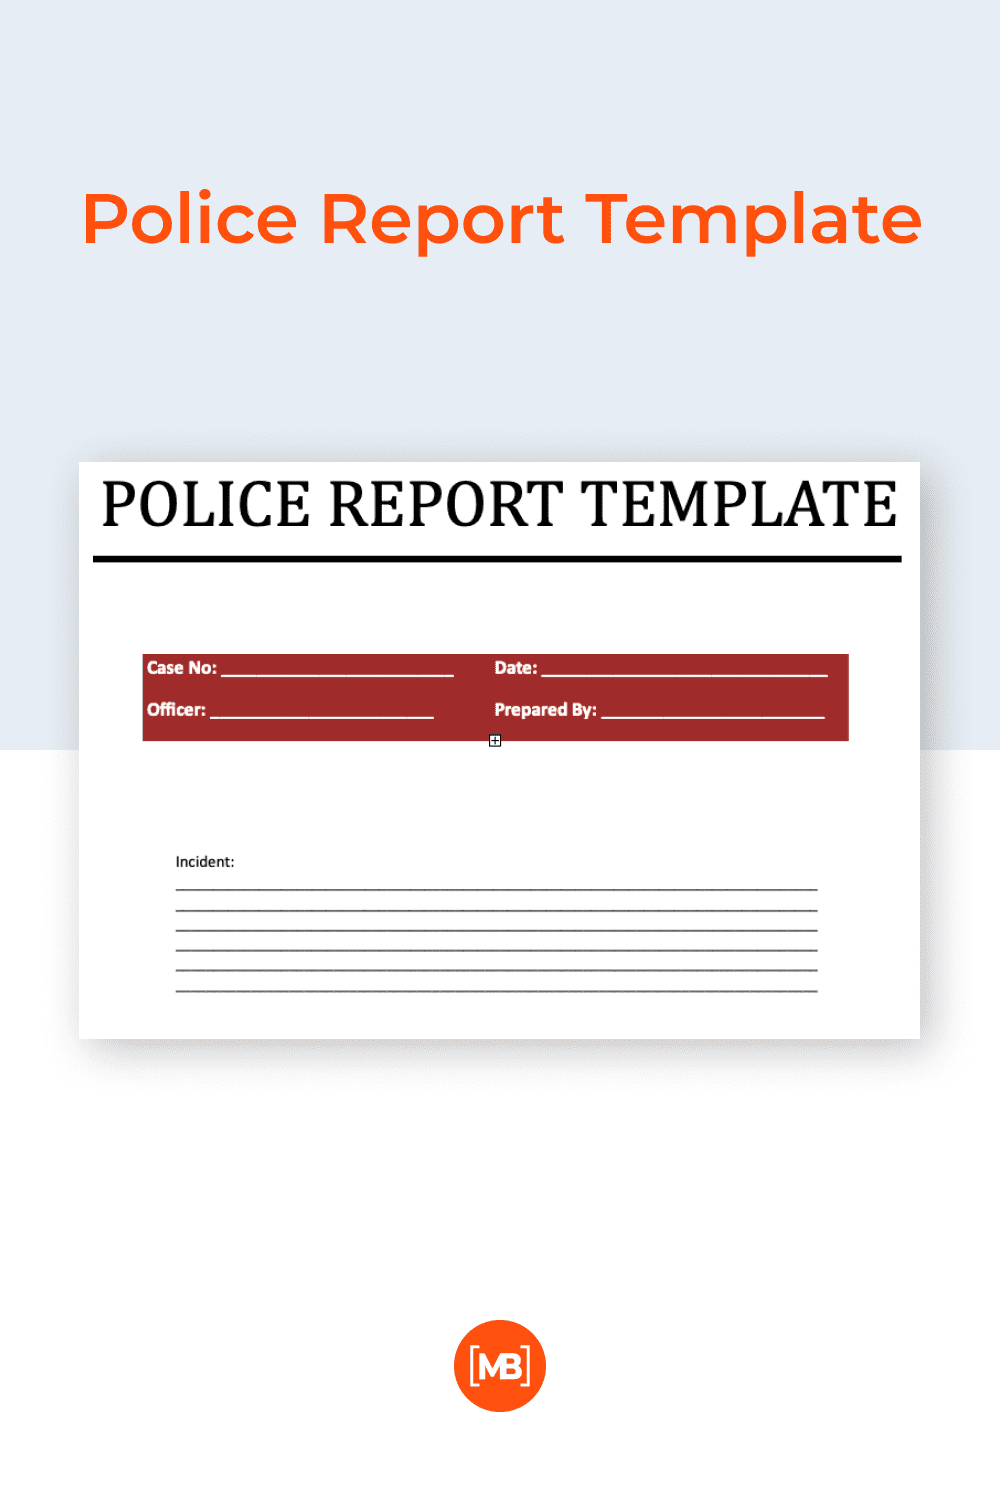 Police Report Template.